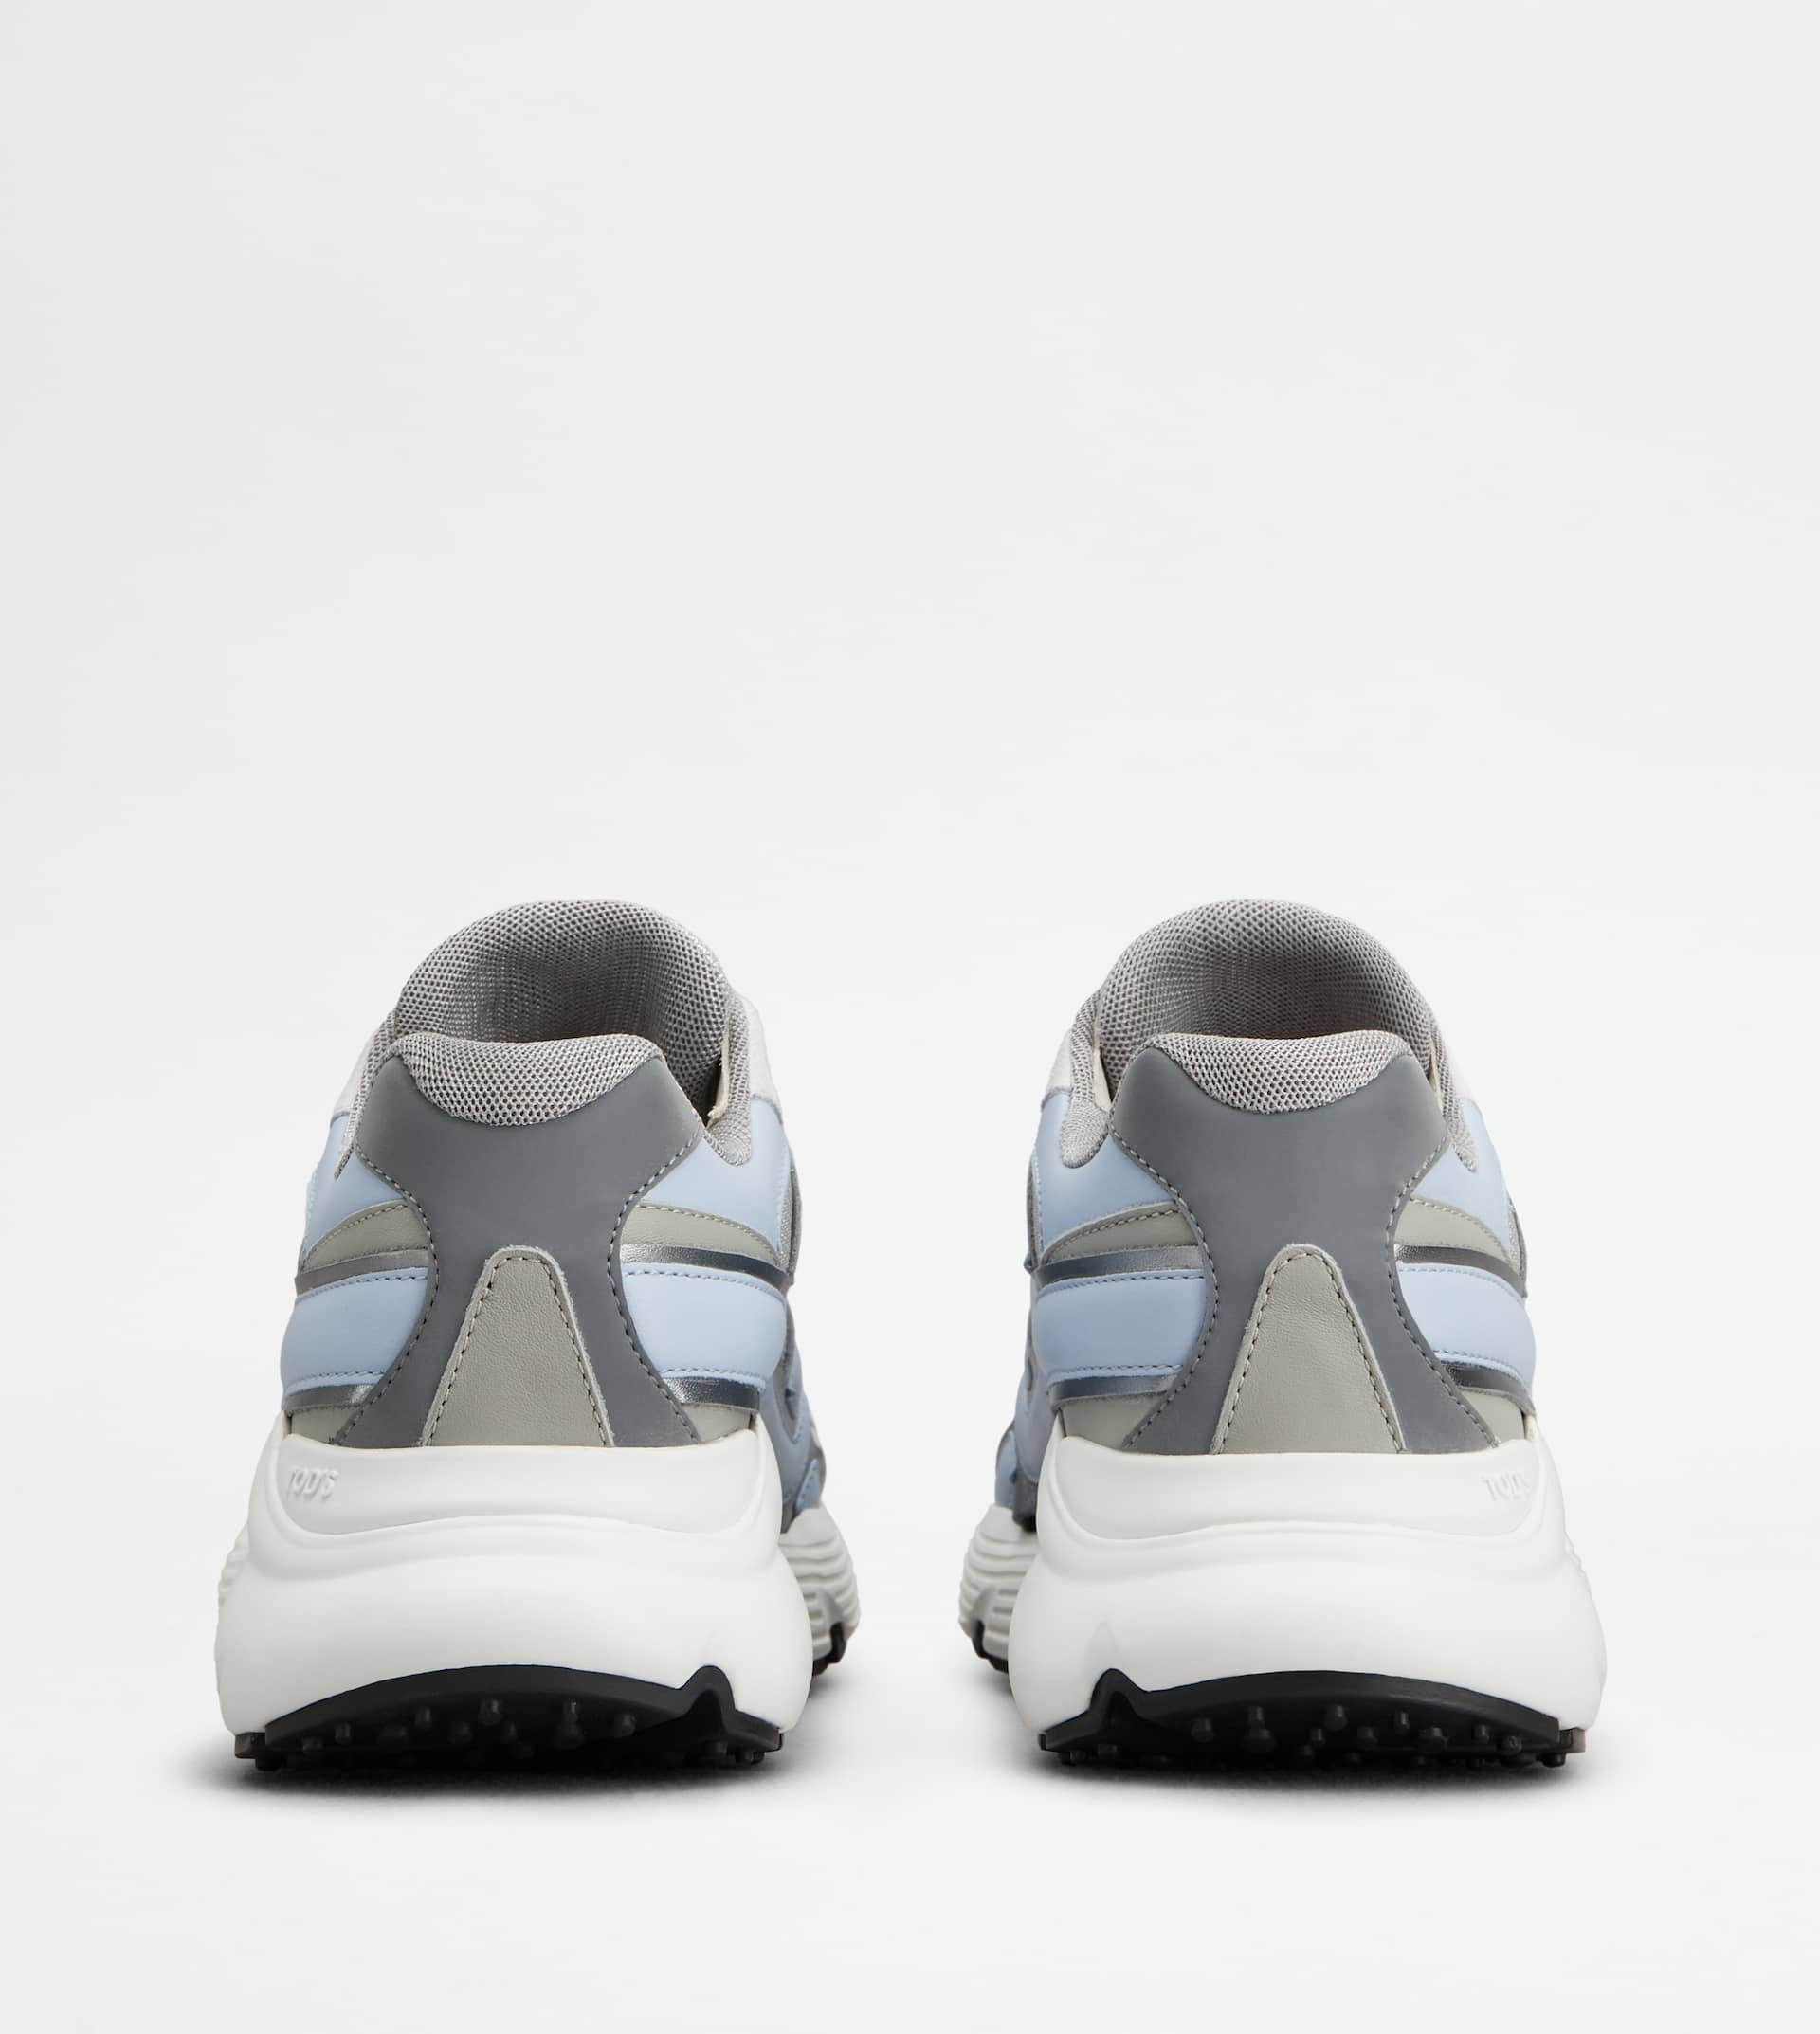 SNEAKERS IN LEATHER AND TECHNICAL FABRIC - SKY BLUE, GREY - 2